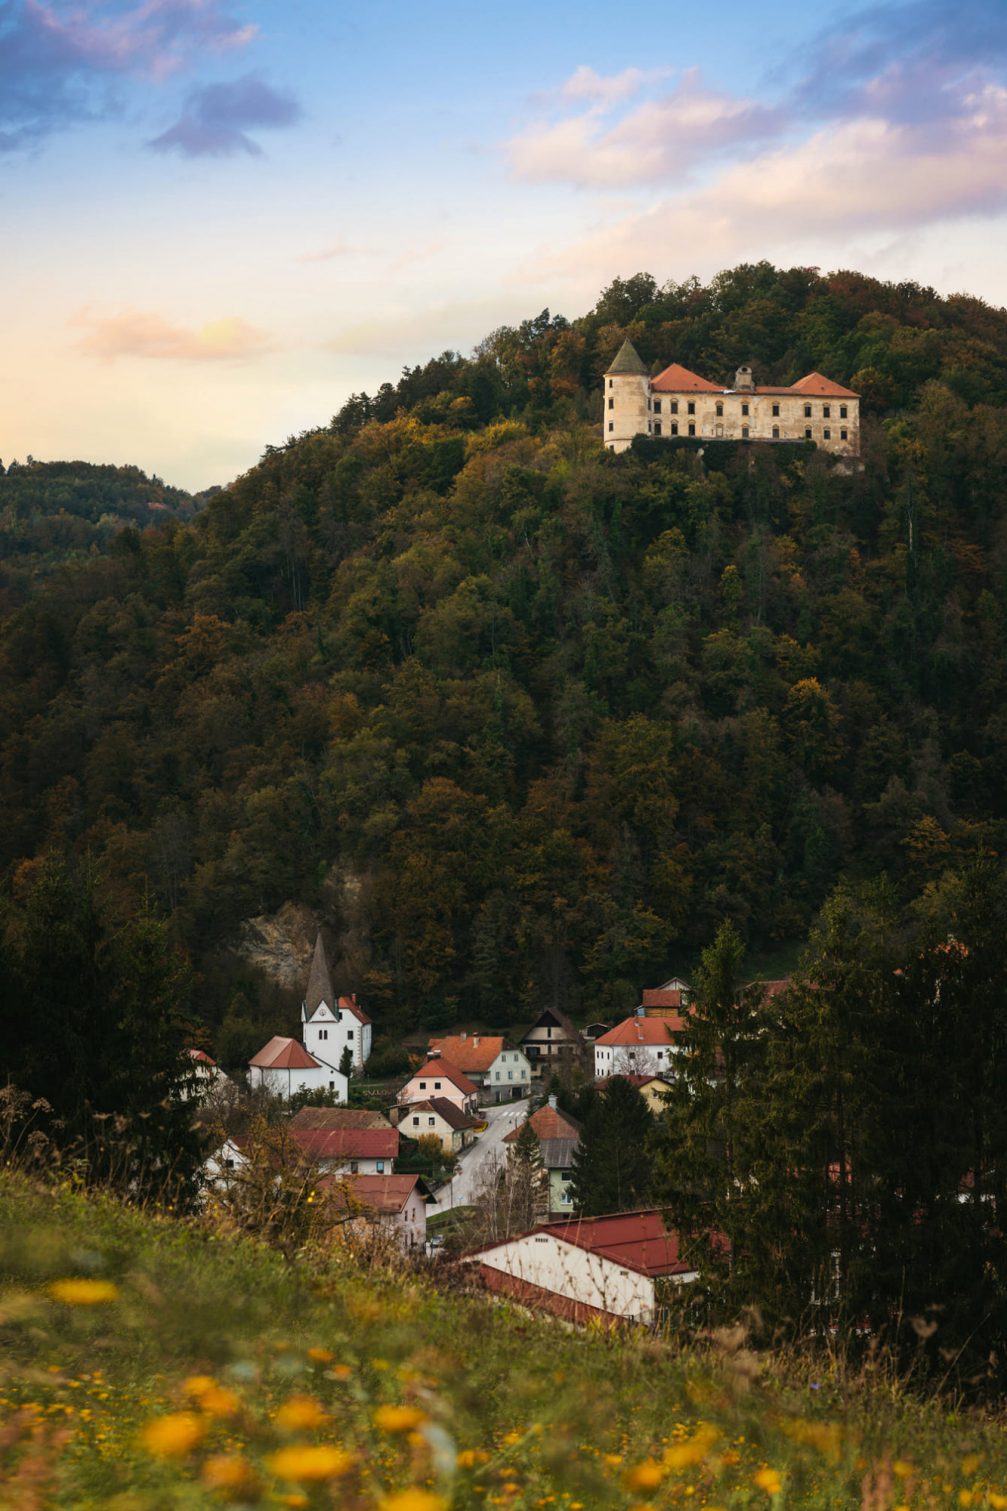 Historic town centre of Podcetrtek with the castle on a hill in the background